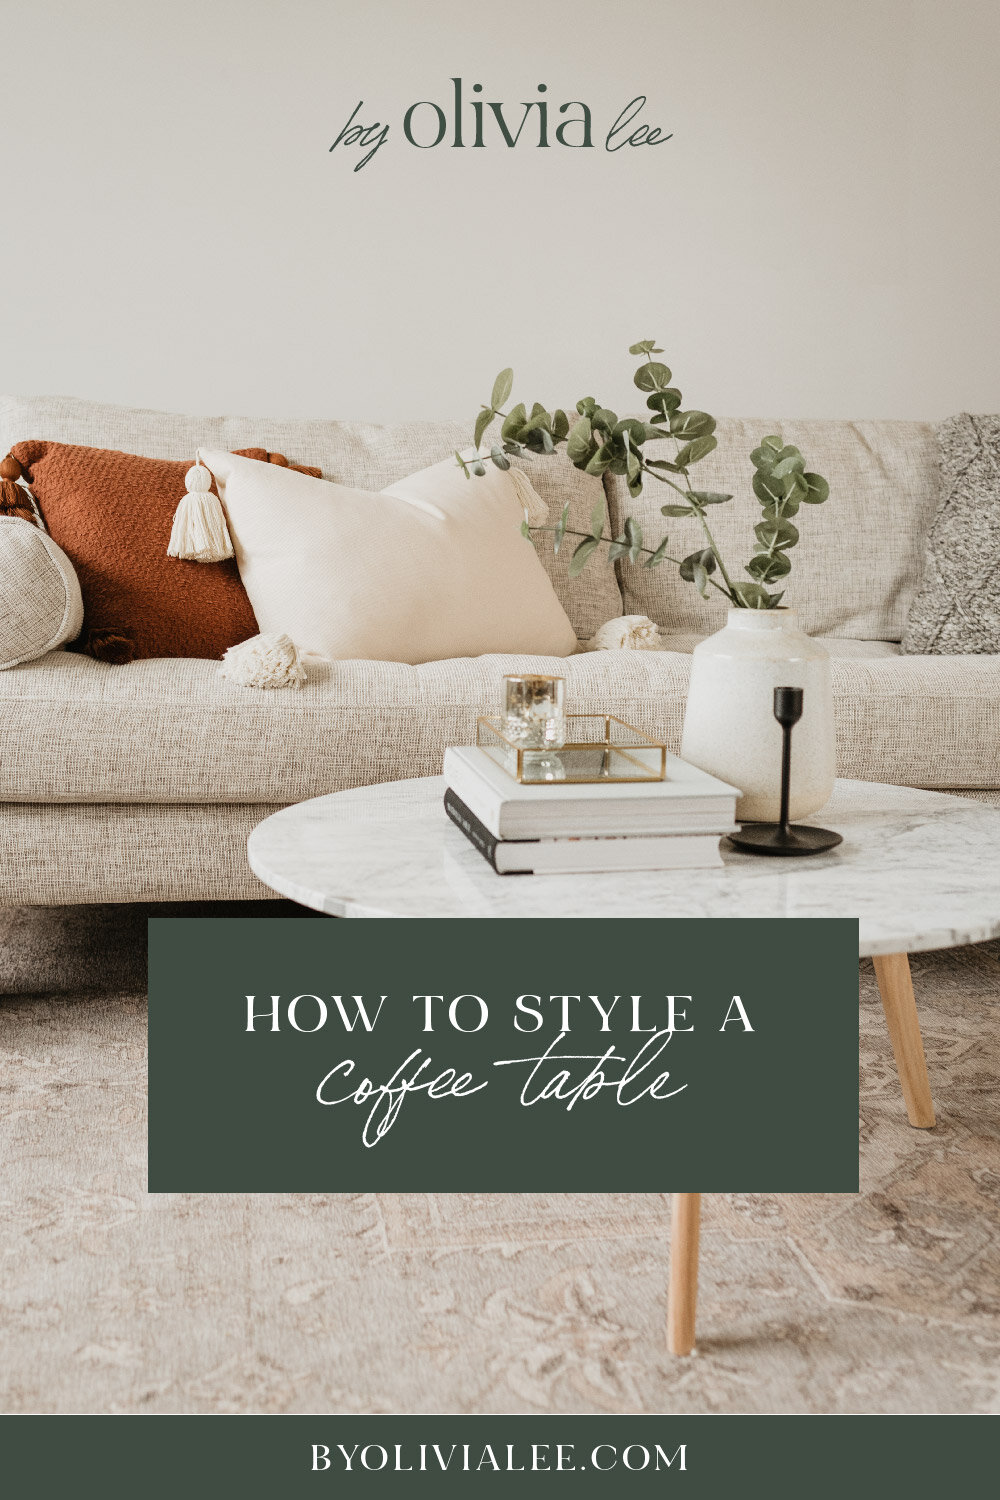 How To Style a Coffee Table-01.jpg